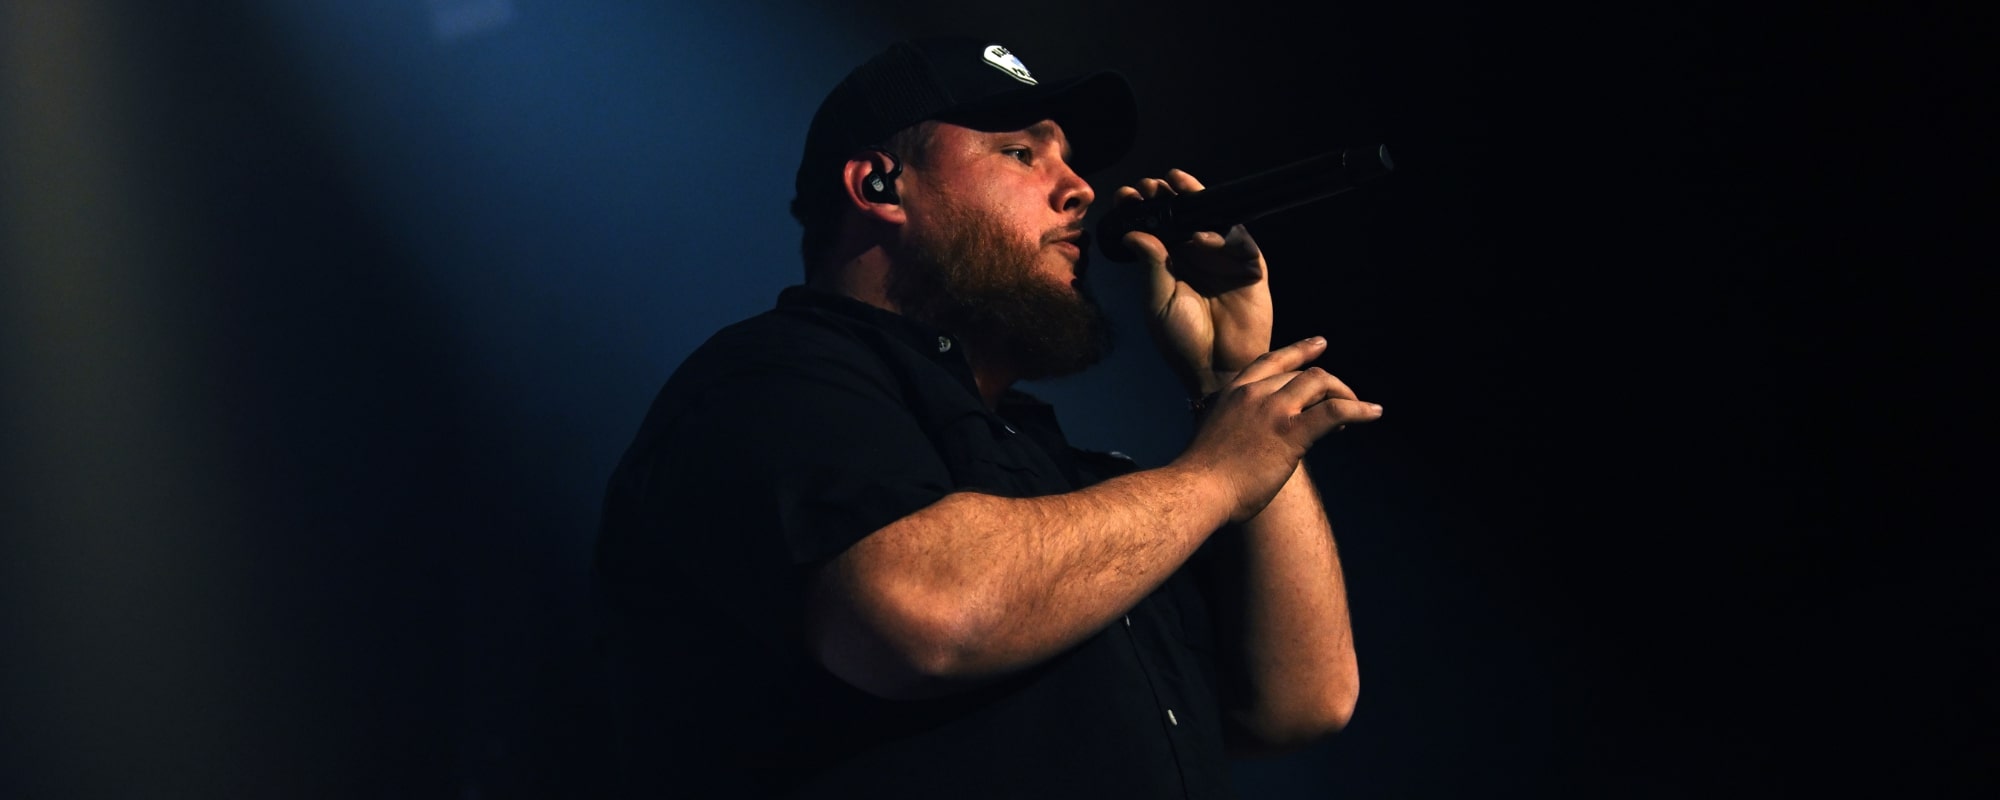 Luke Combs Tops the Chart with a Song He Almost Didn’t Record